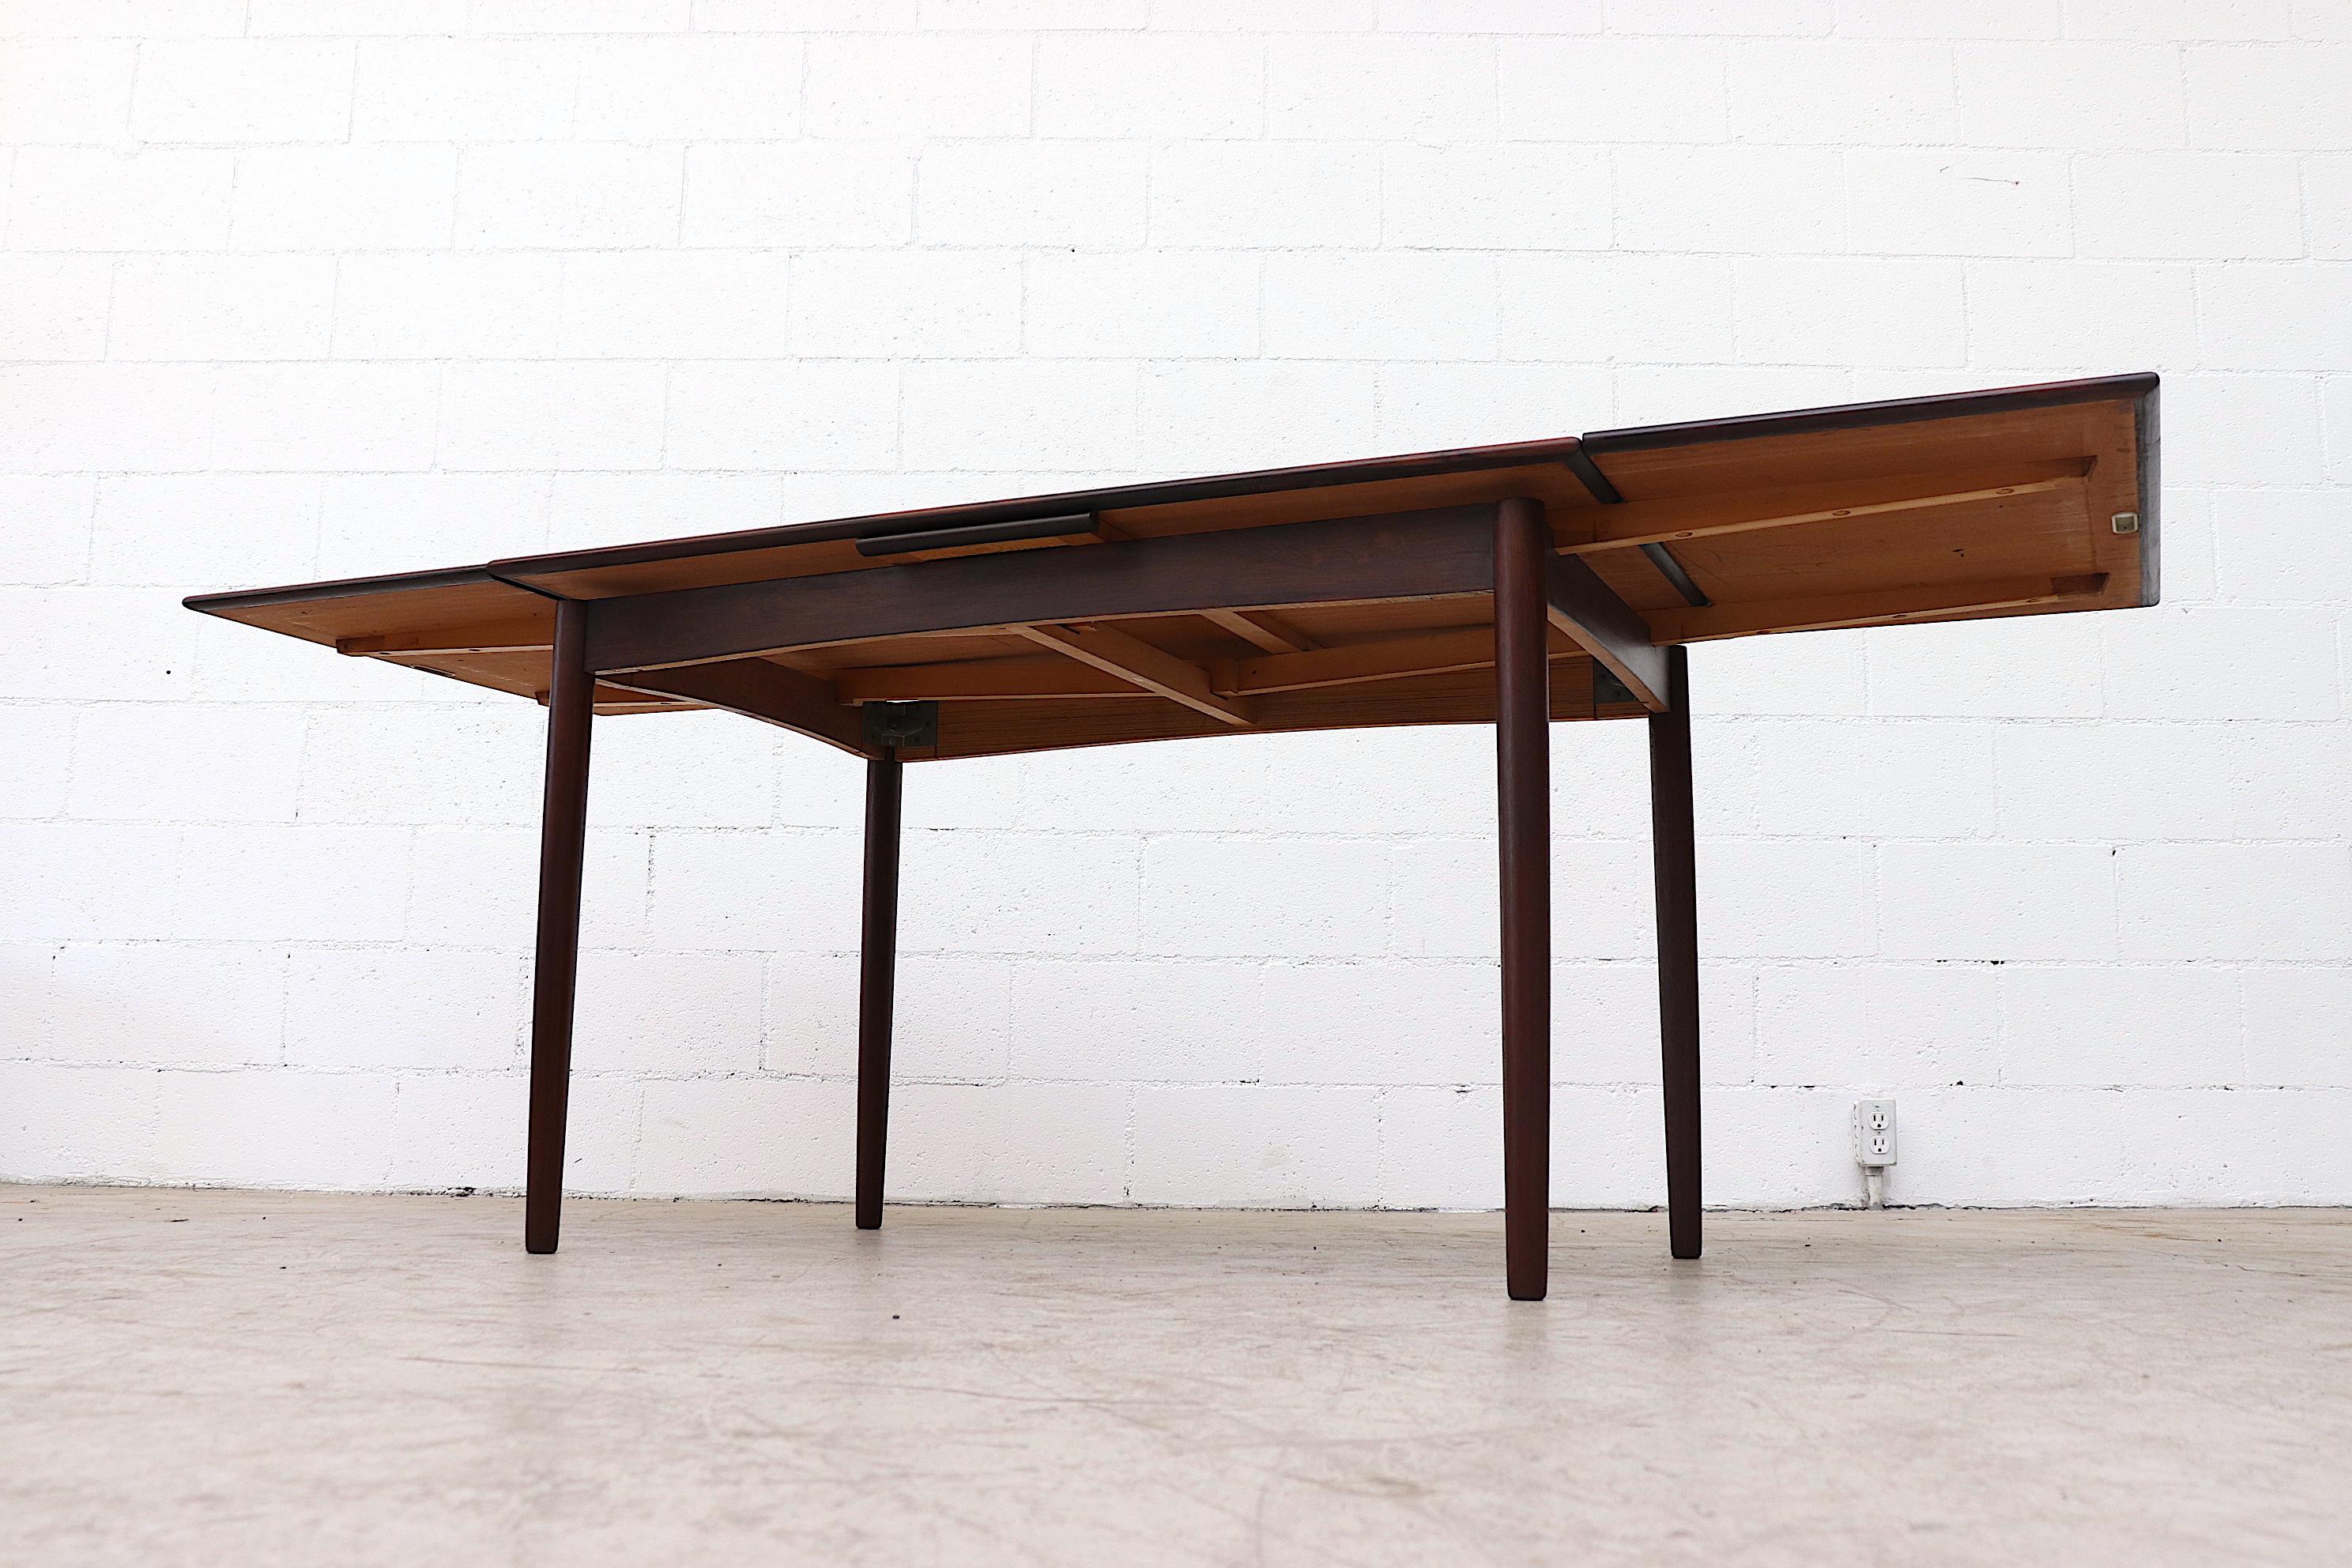 Mid-20th Century Danish Rosewood Dining Table with Leaf Extension